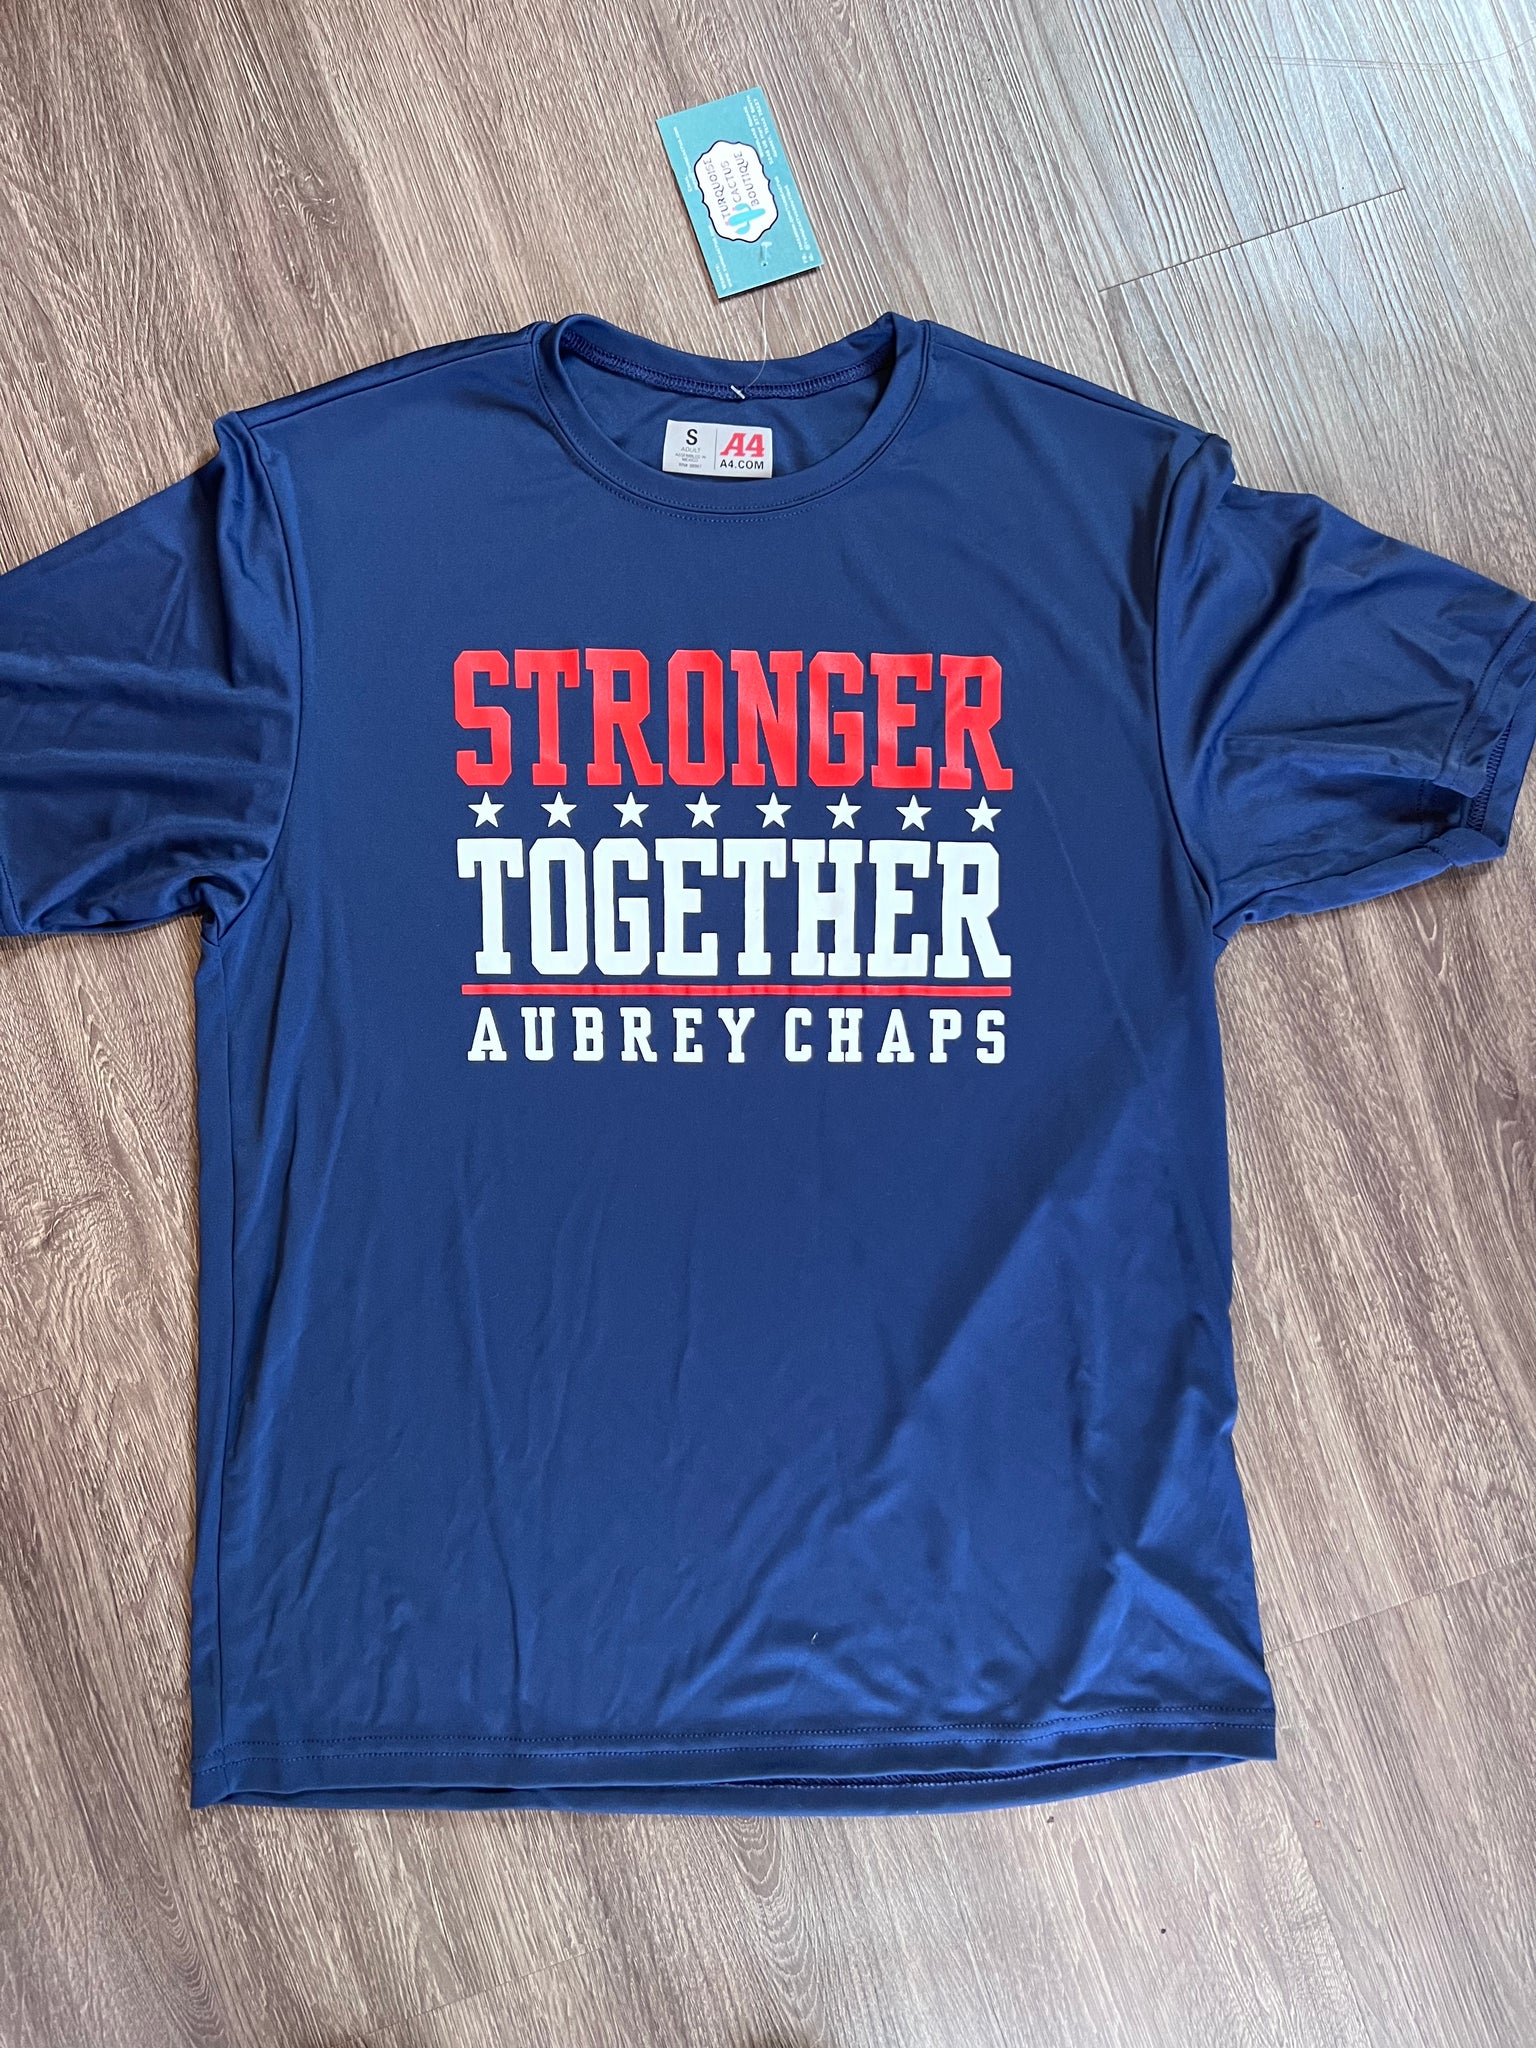 Chaps Stronger Together Tee Adult